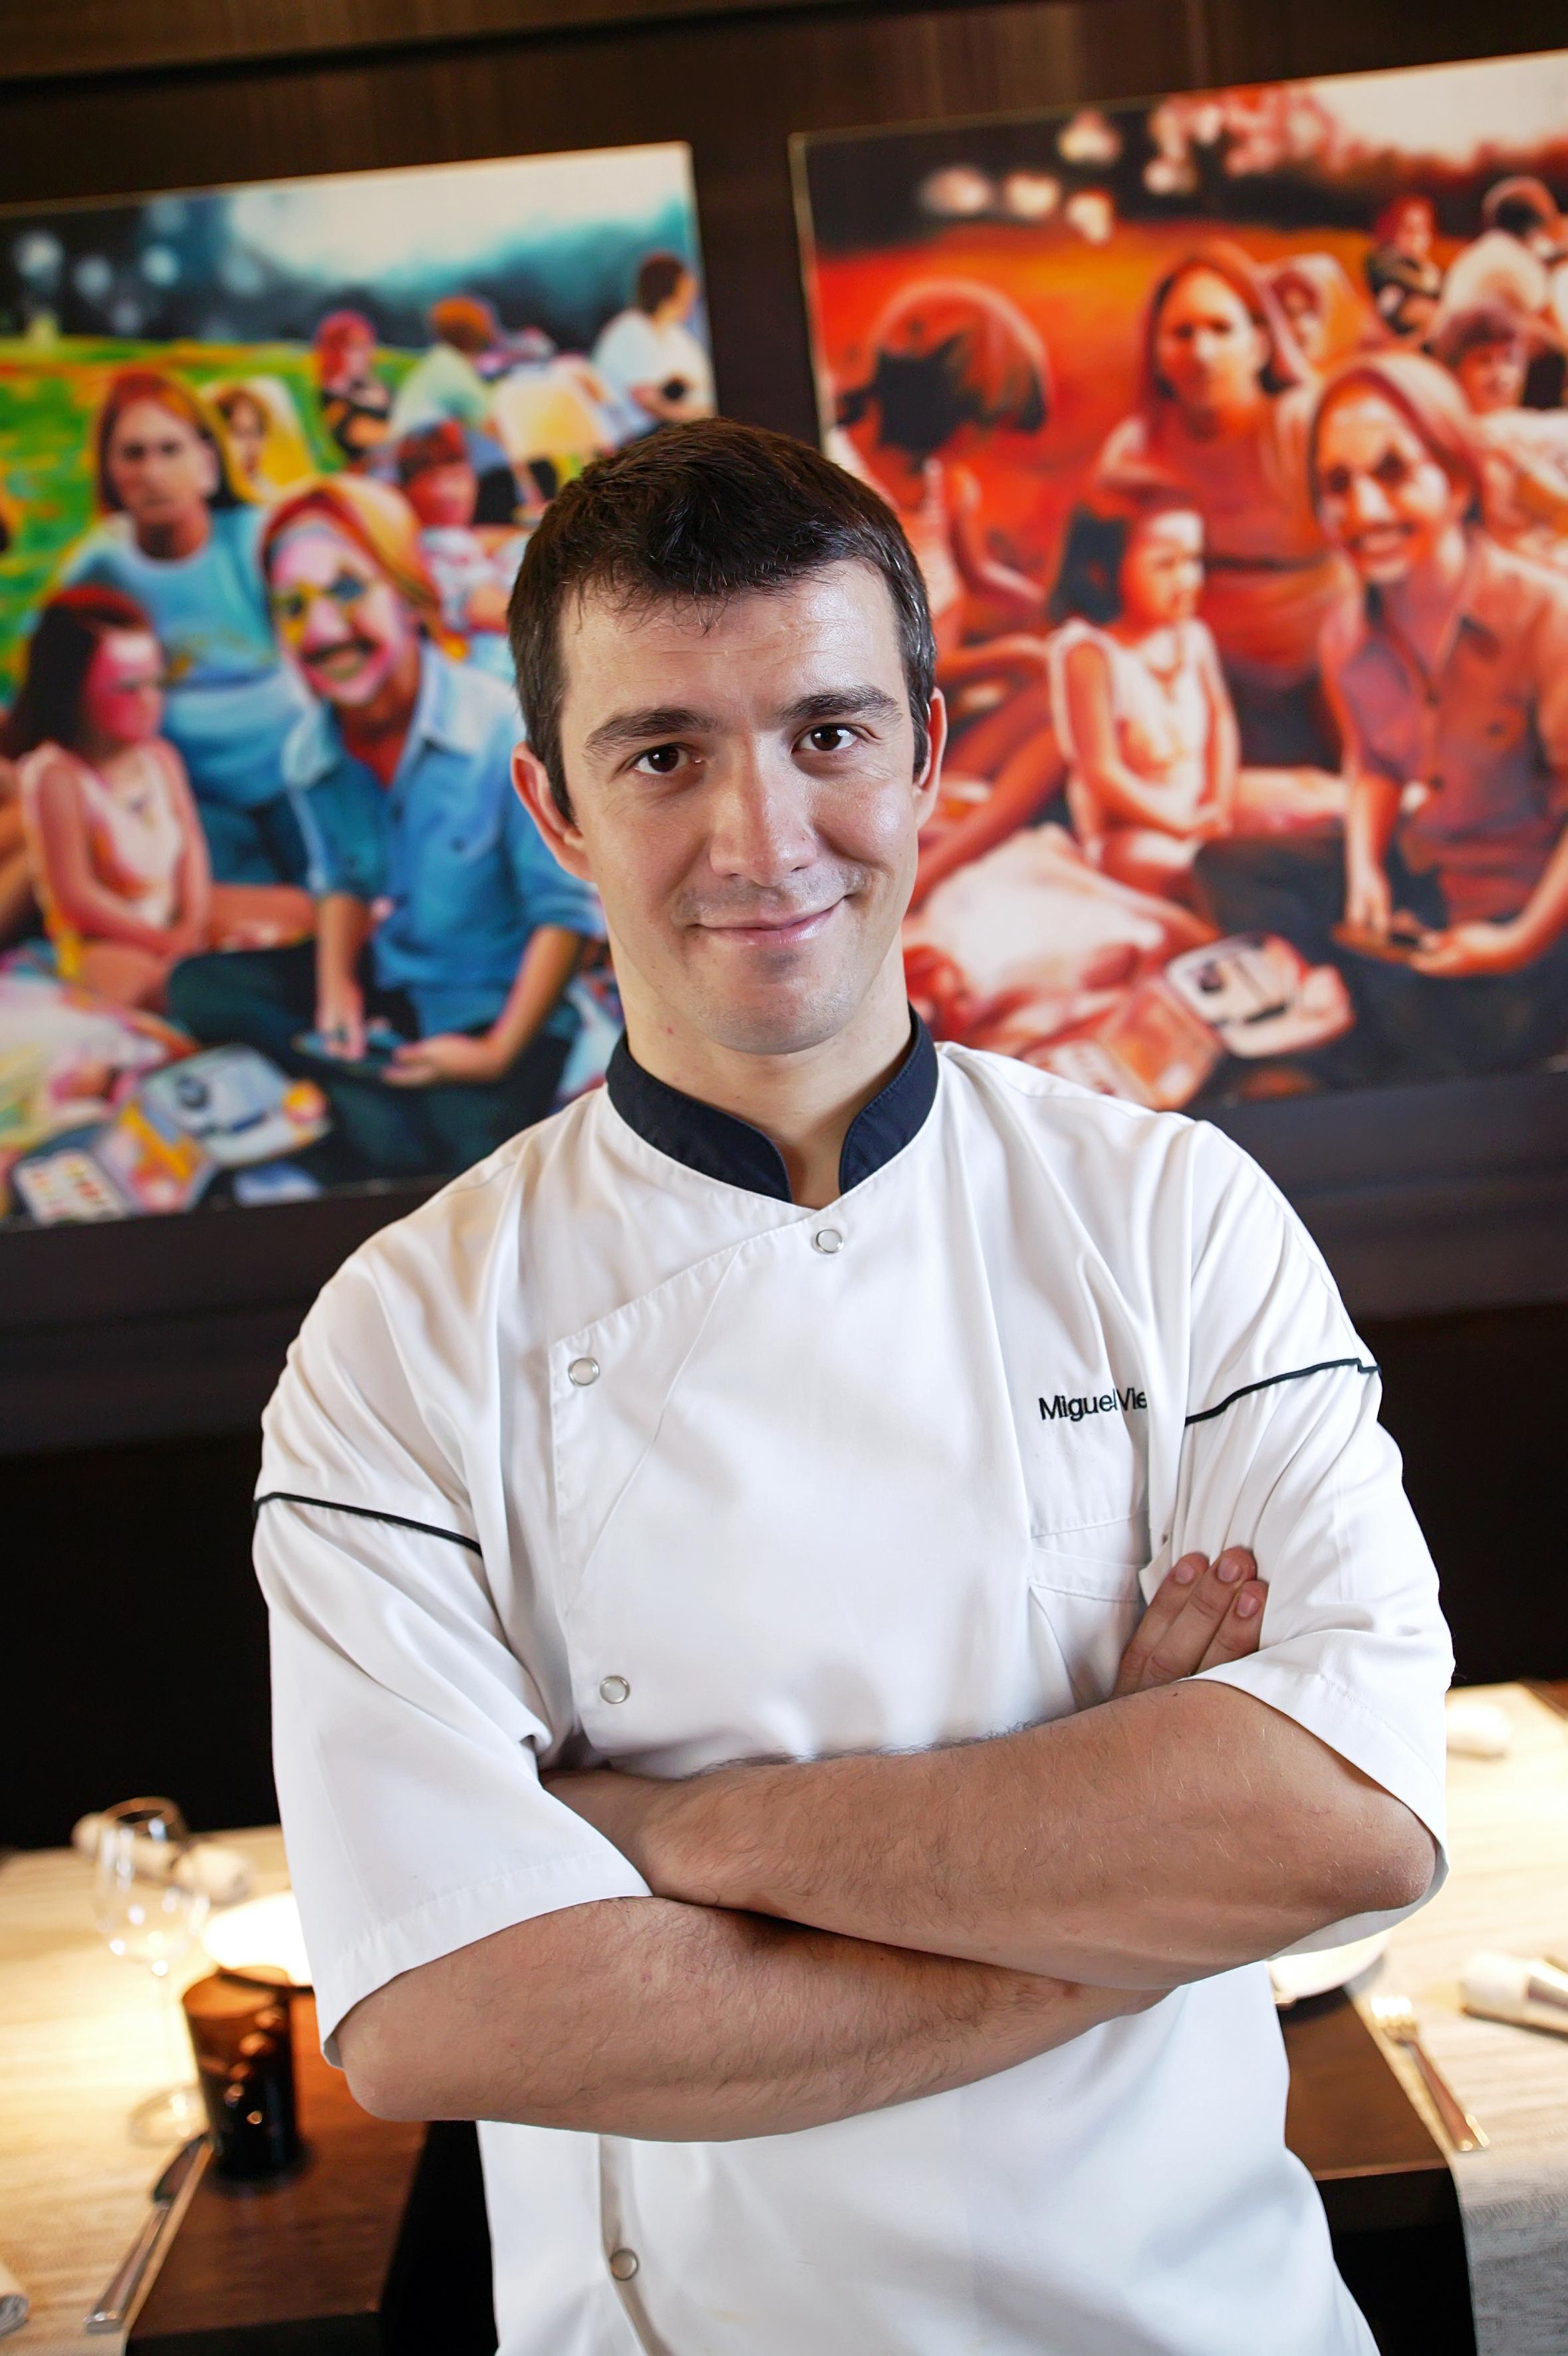 Xpat Interview: Miguel Vieira, Former Chef, Costes Restaurant Budapest